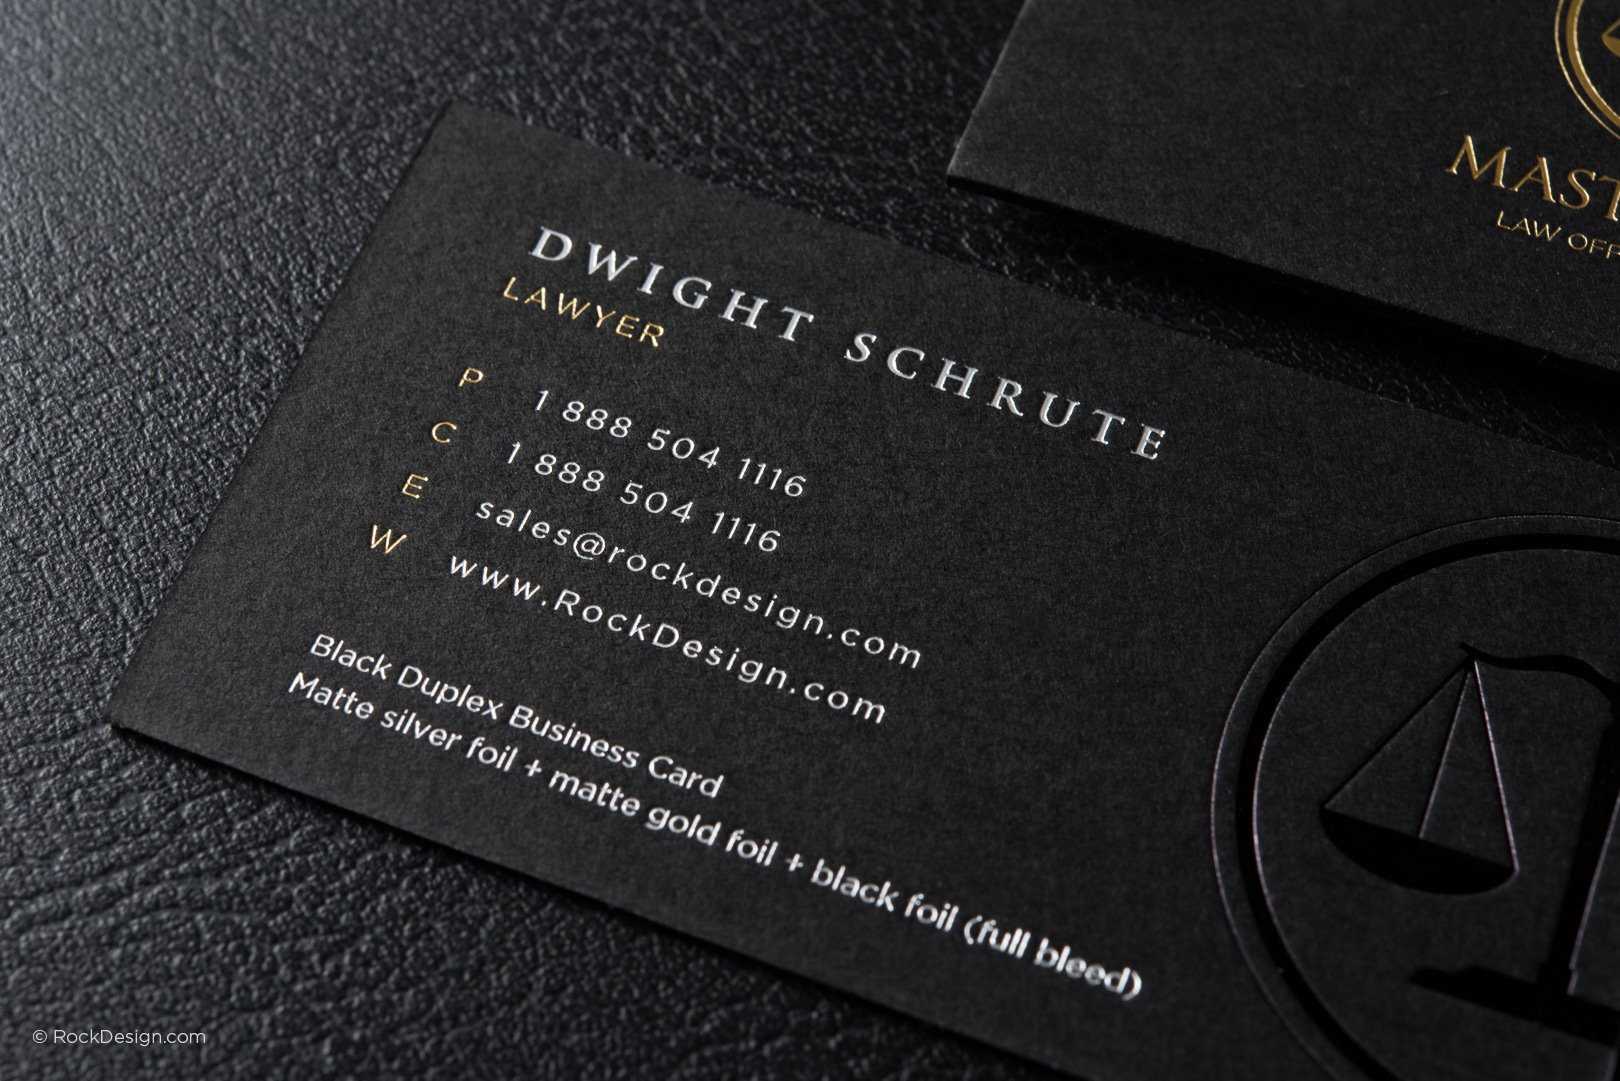 Free Lawyer Business Card Template | Rockdesign Throughout Lawyer Business Cards Templates